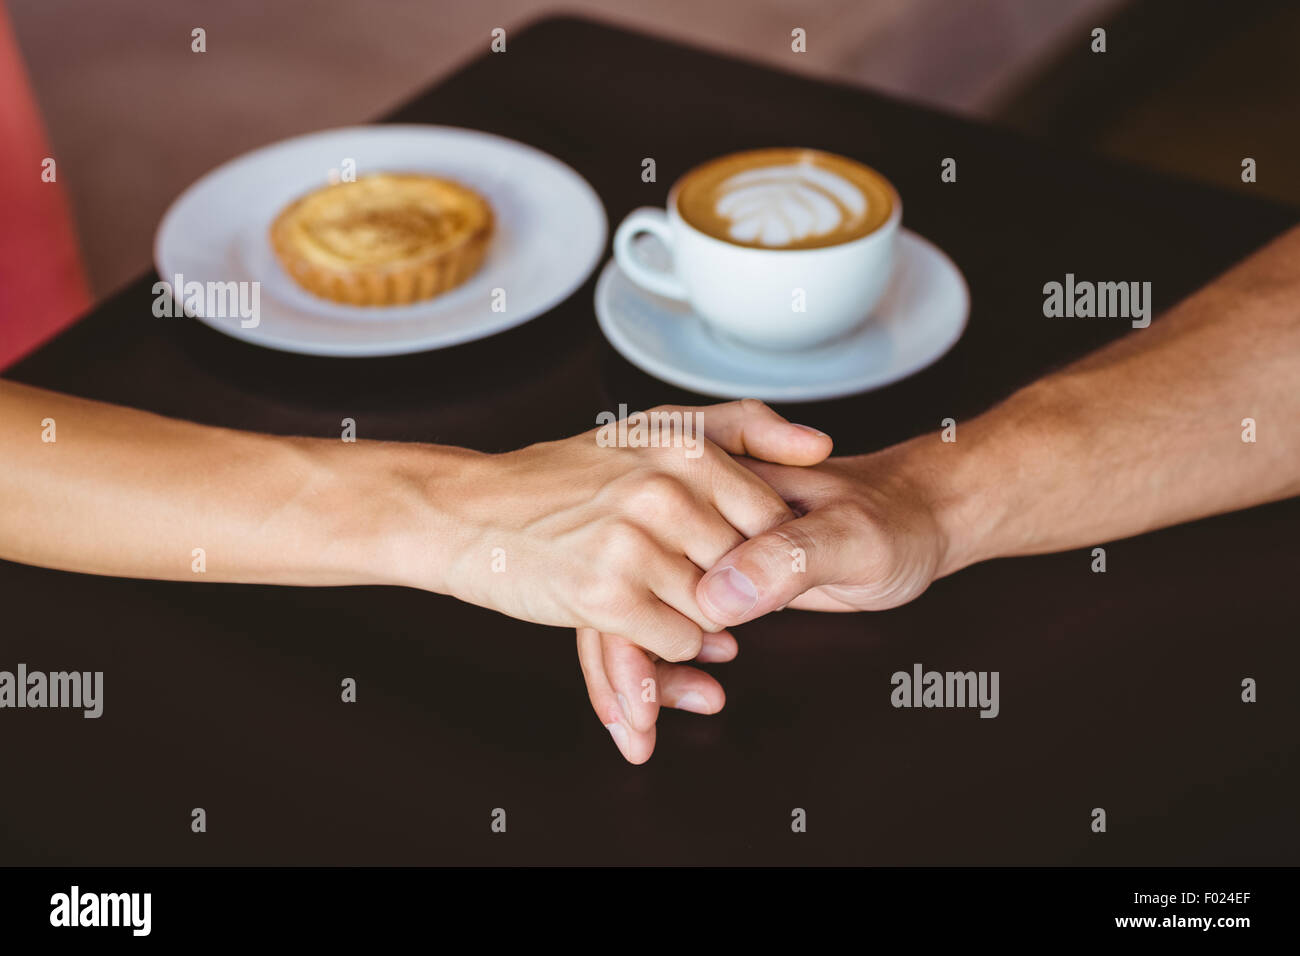 Cute couple on a date holding hands Stock Photo